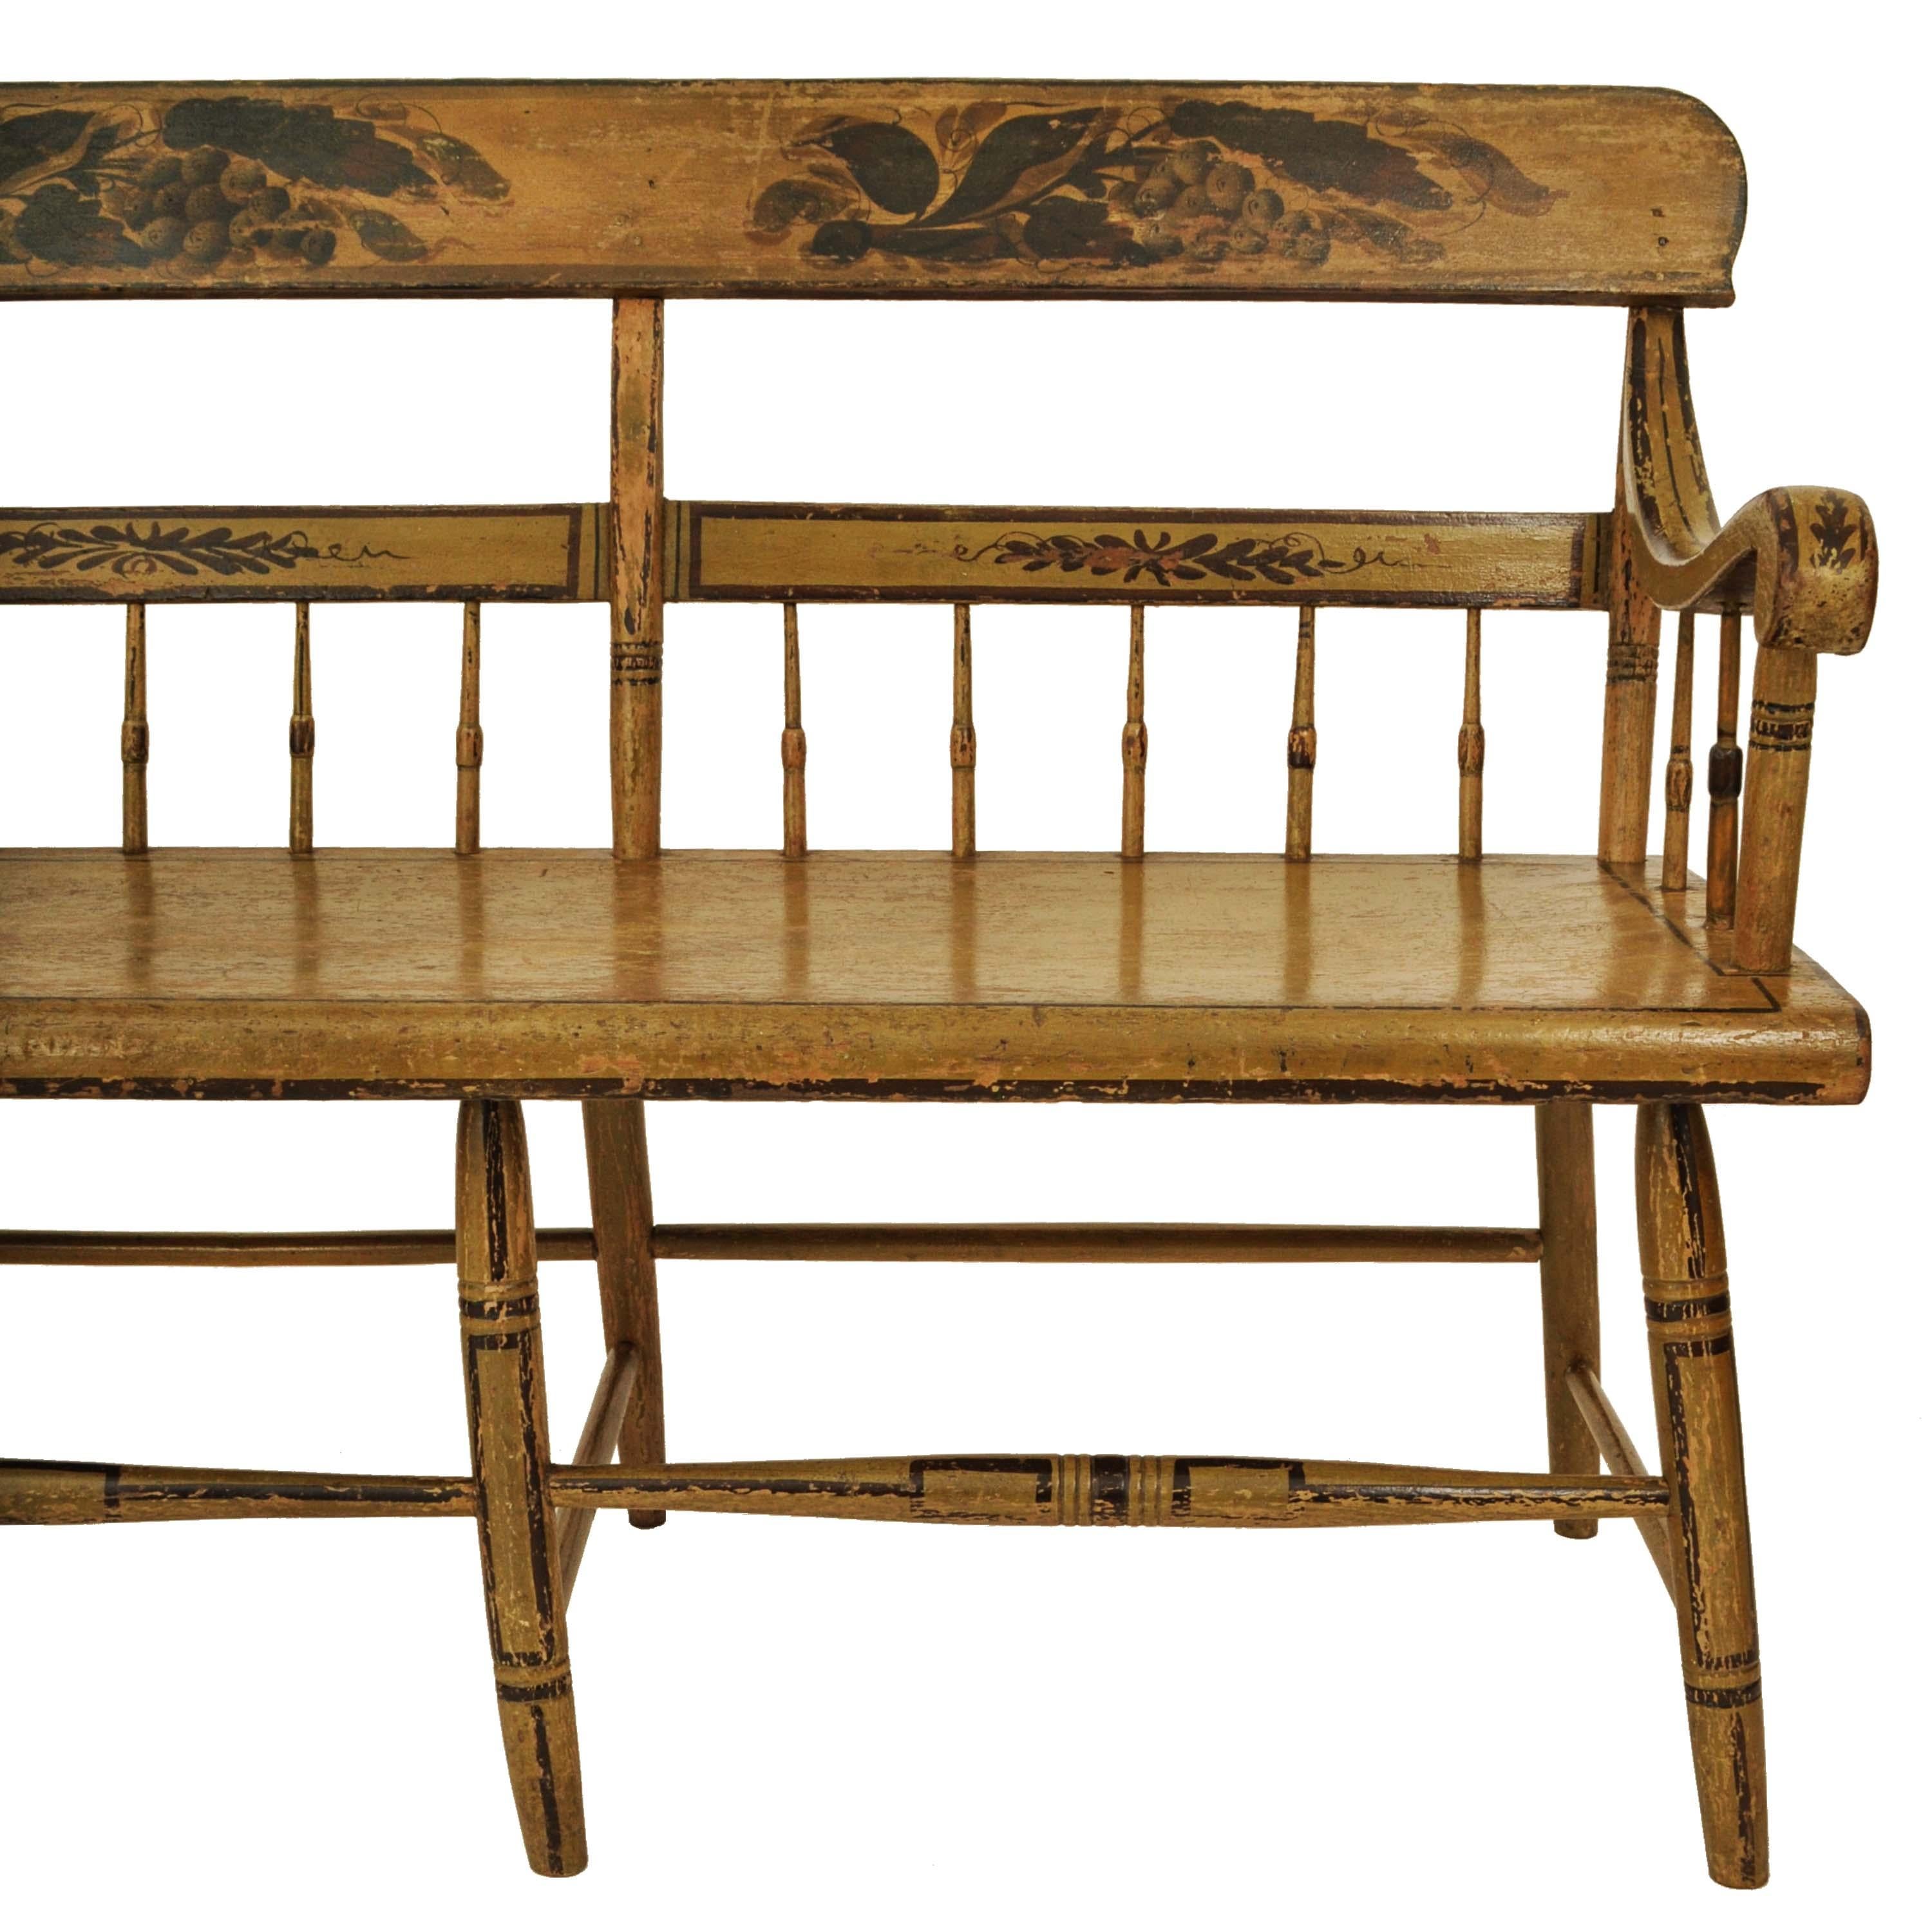 Hand-Painted Antique American Federal Baltimore Painted Spindled Windsor Bench Settee 1820 For Sale